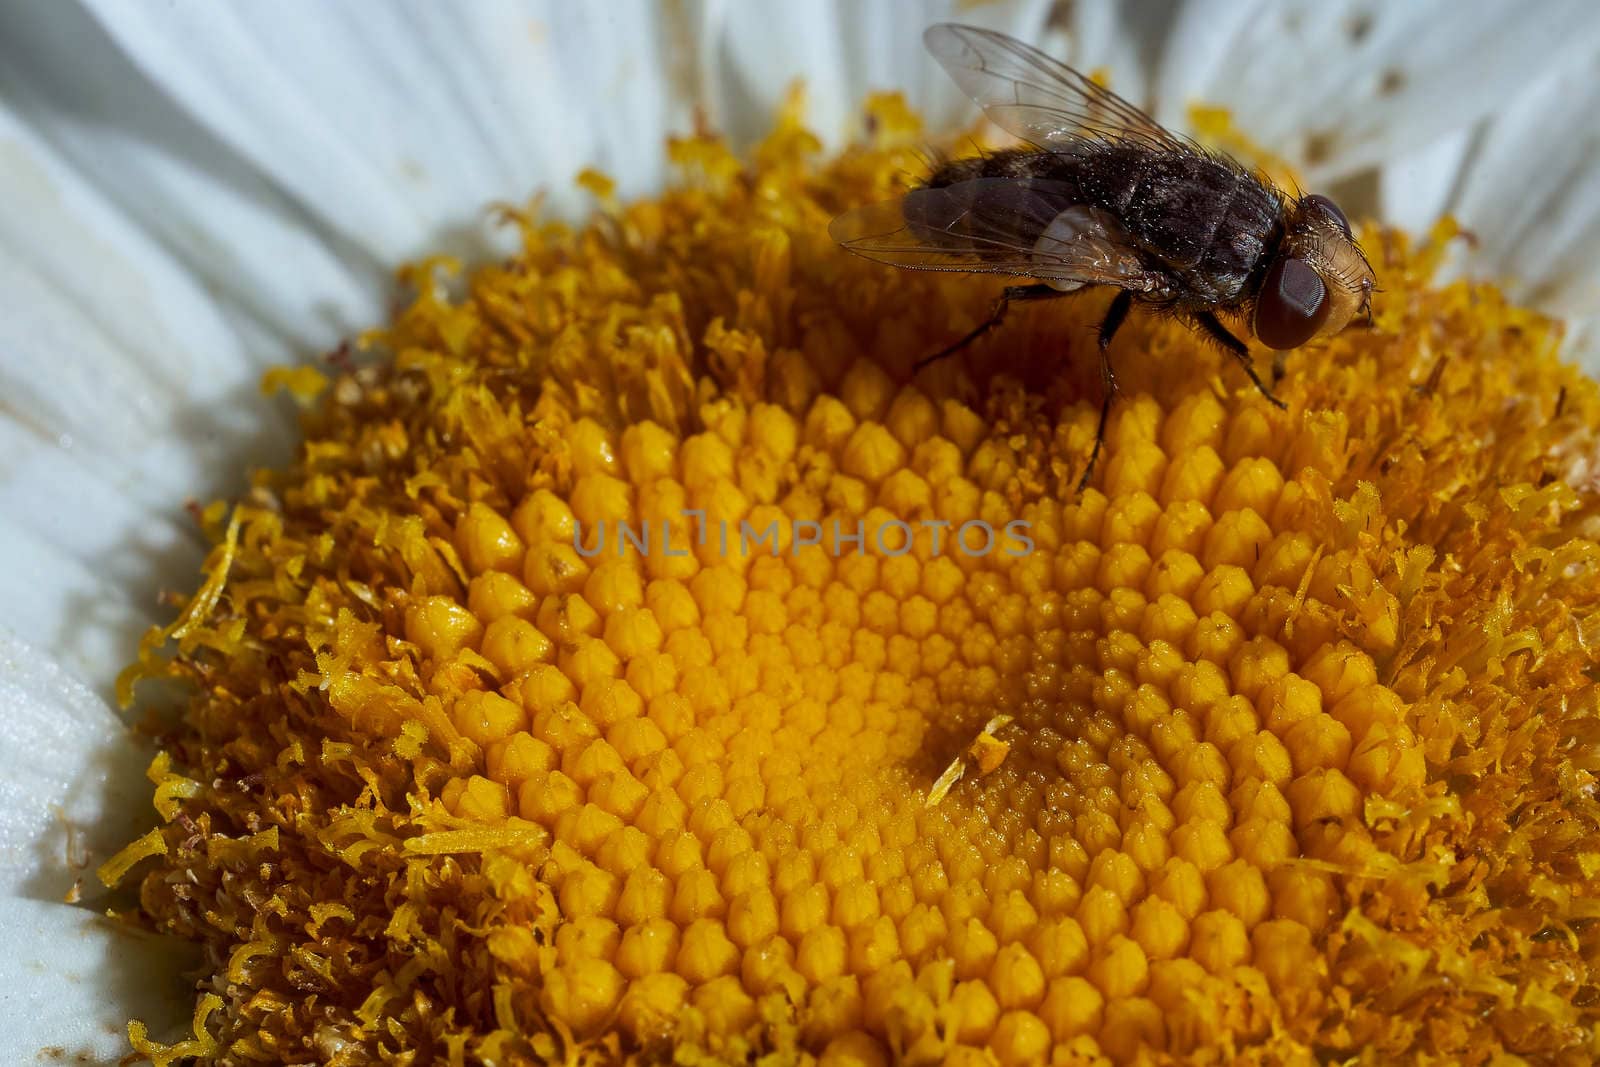 Close-up chamomile daisy flower with yellow nectar . High quality photo